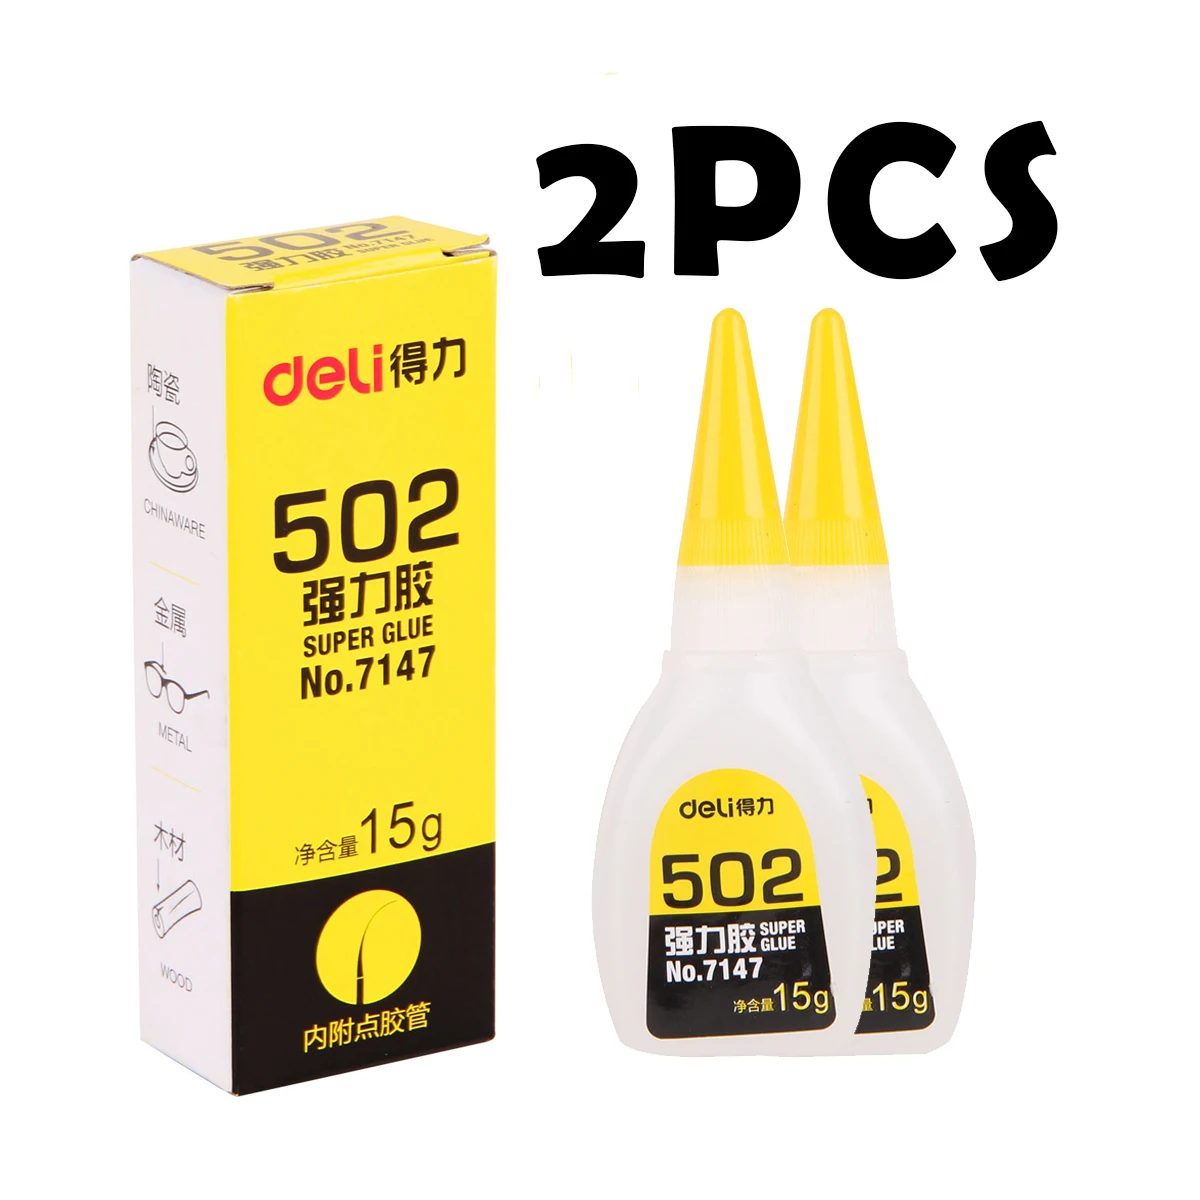 

2pcs Deli 502 Super Glue Instant Quick-drying Cyanoacrylate Adhesive Leather Rubber Wood Metal Strong Bond 15g Liquid Glue Tool